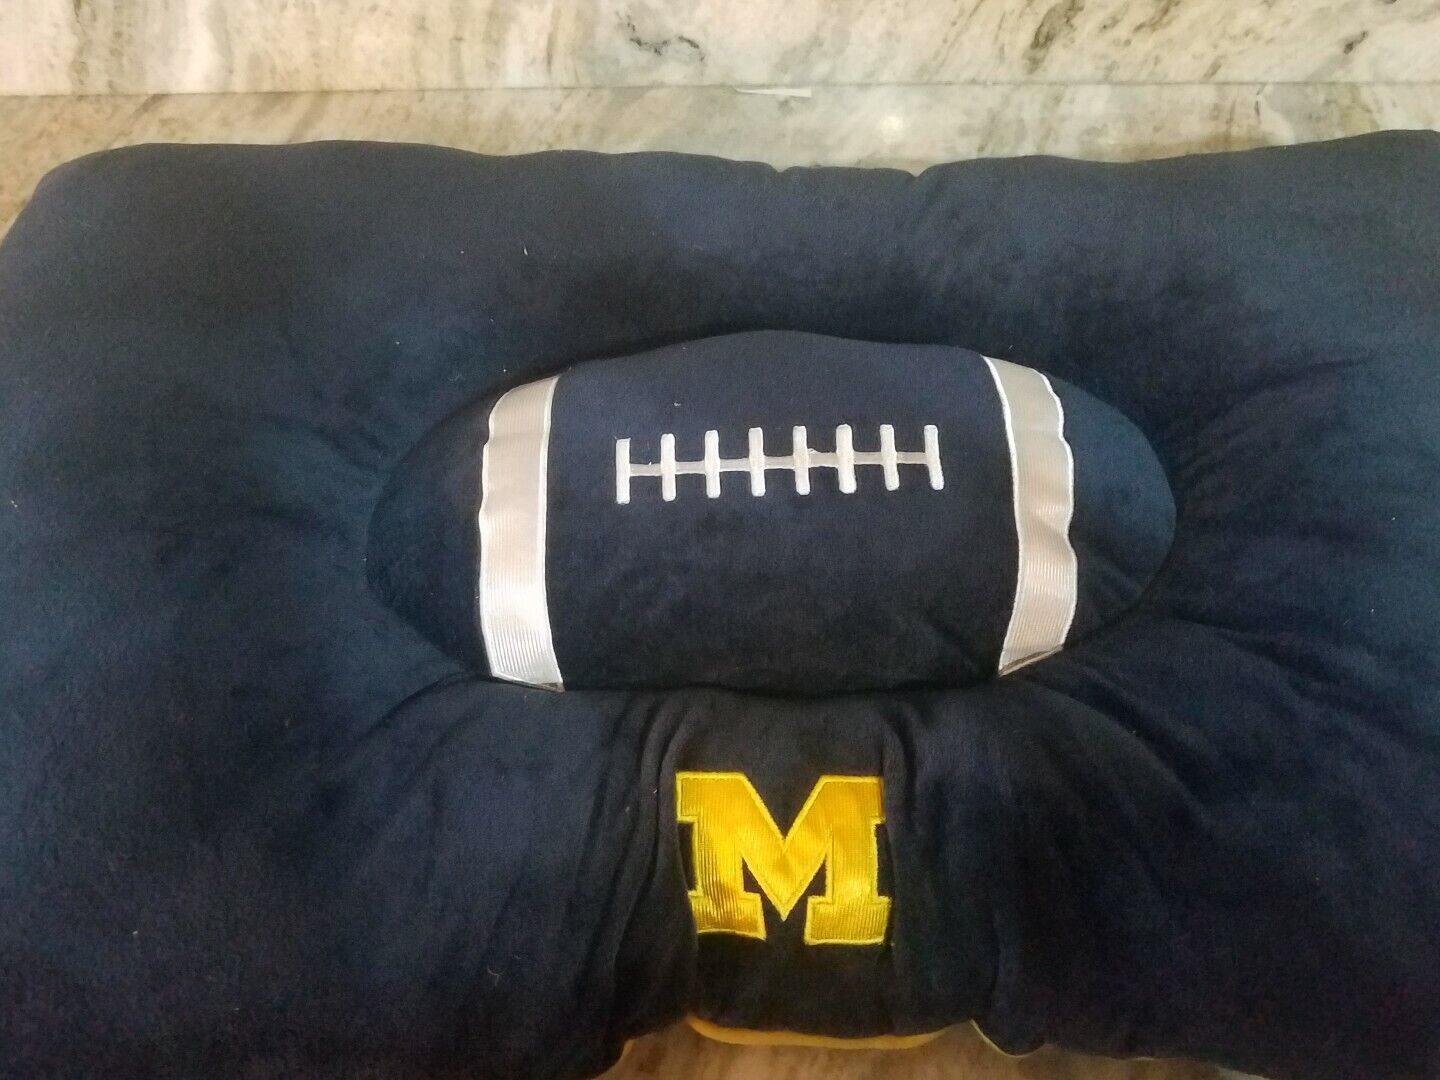 NCAA Soft & Cozy Plush Pillow Pet Bed Mattress for DOGS & CATS. U OF M - $117.58